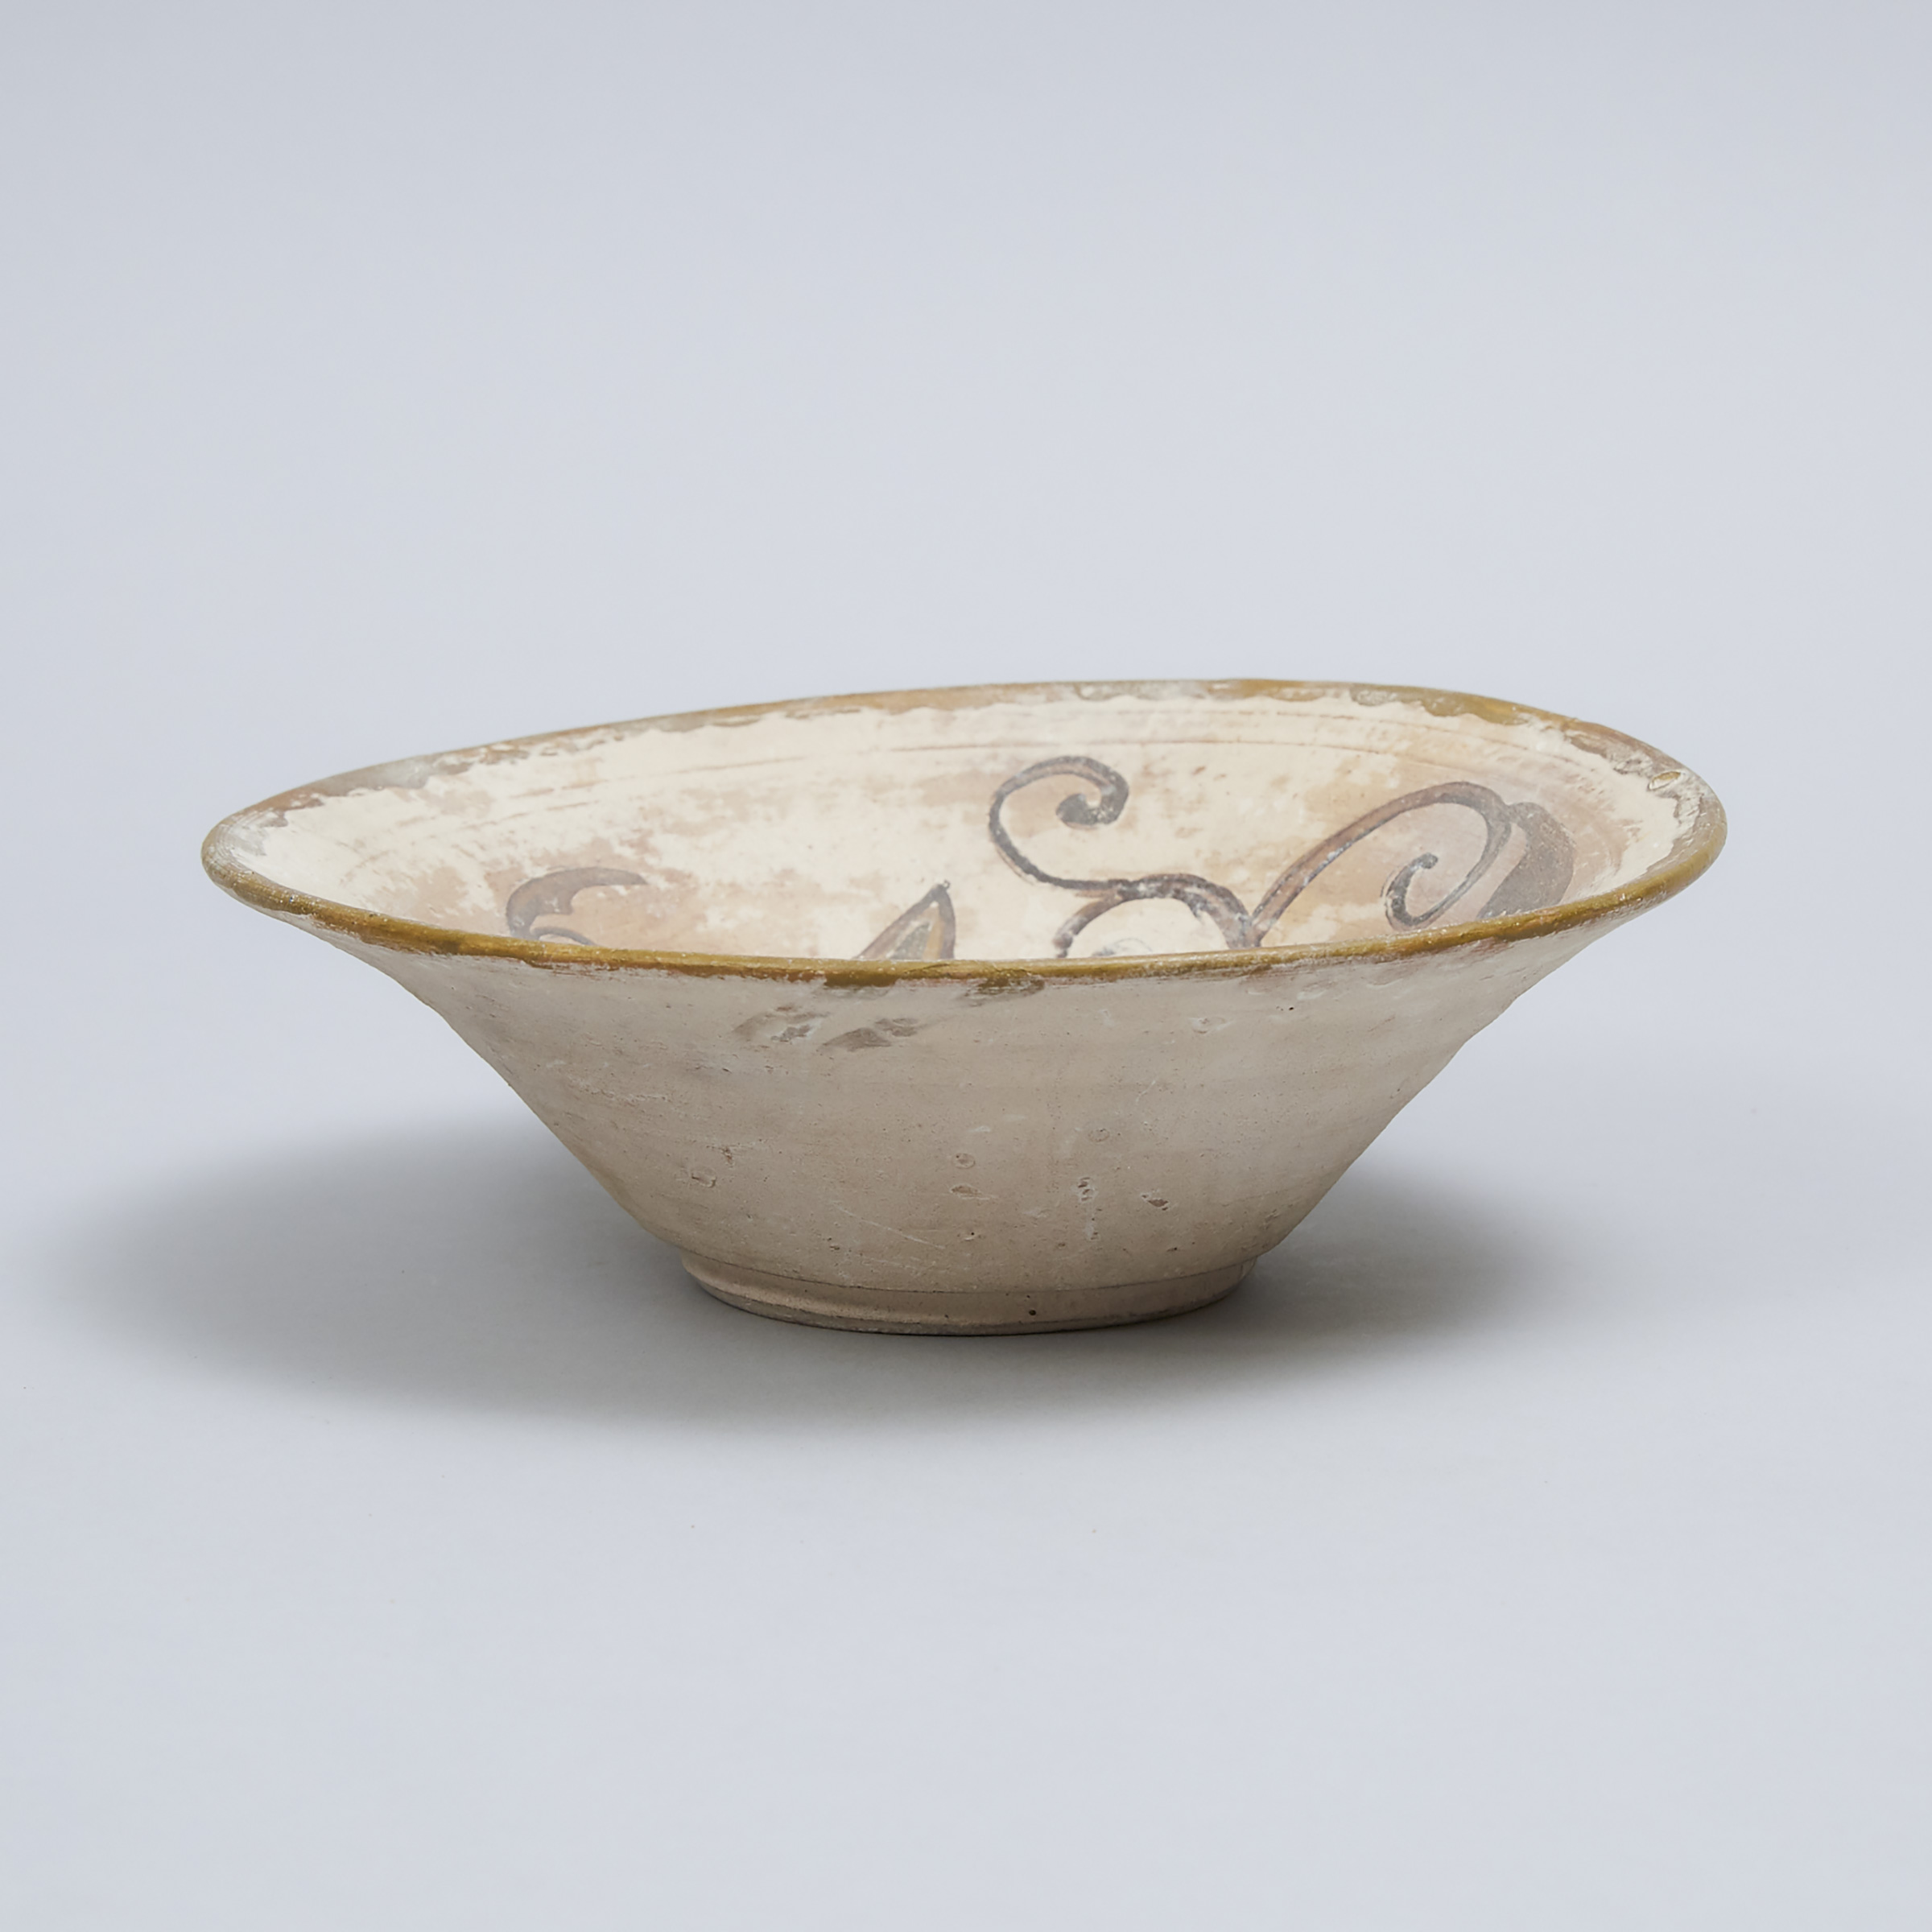 Fatimid Style Unglazed Pottery Bowl with Rabbit, 11th/12th century